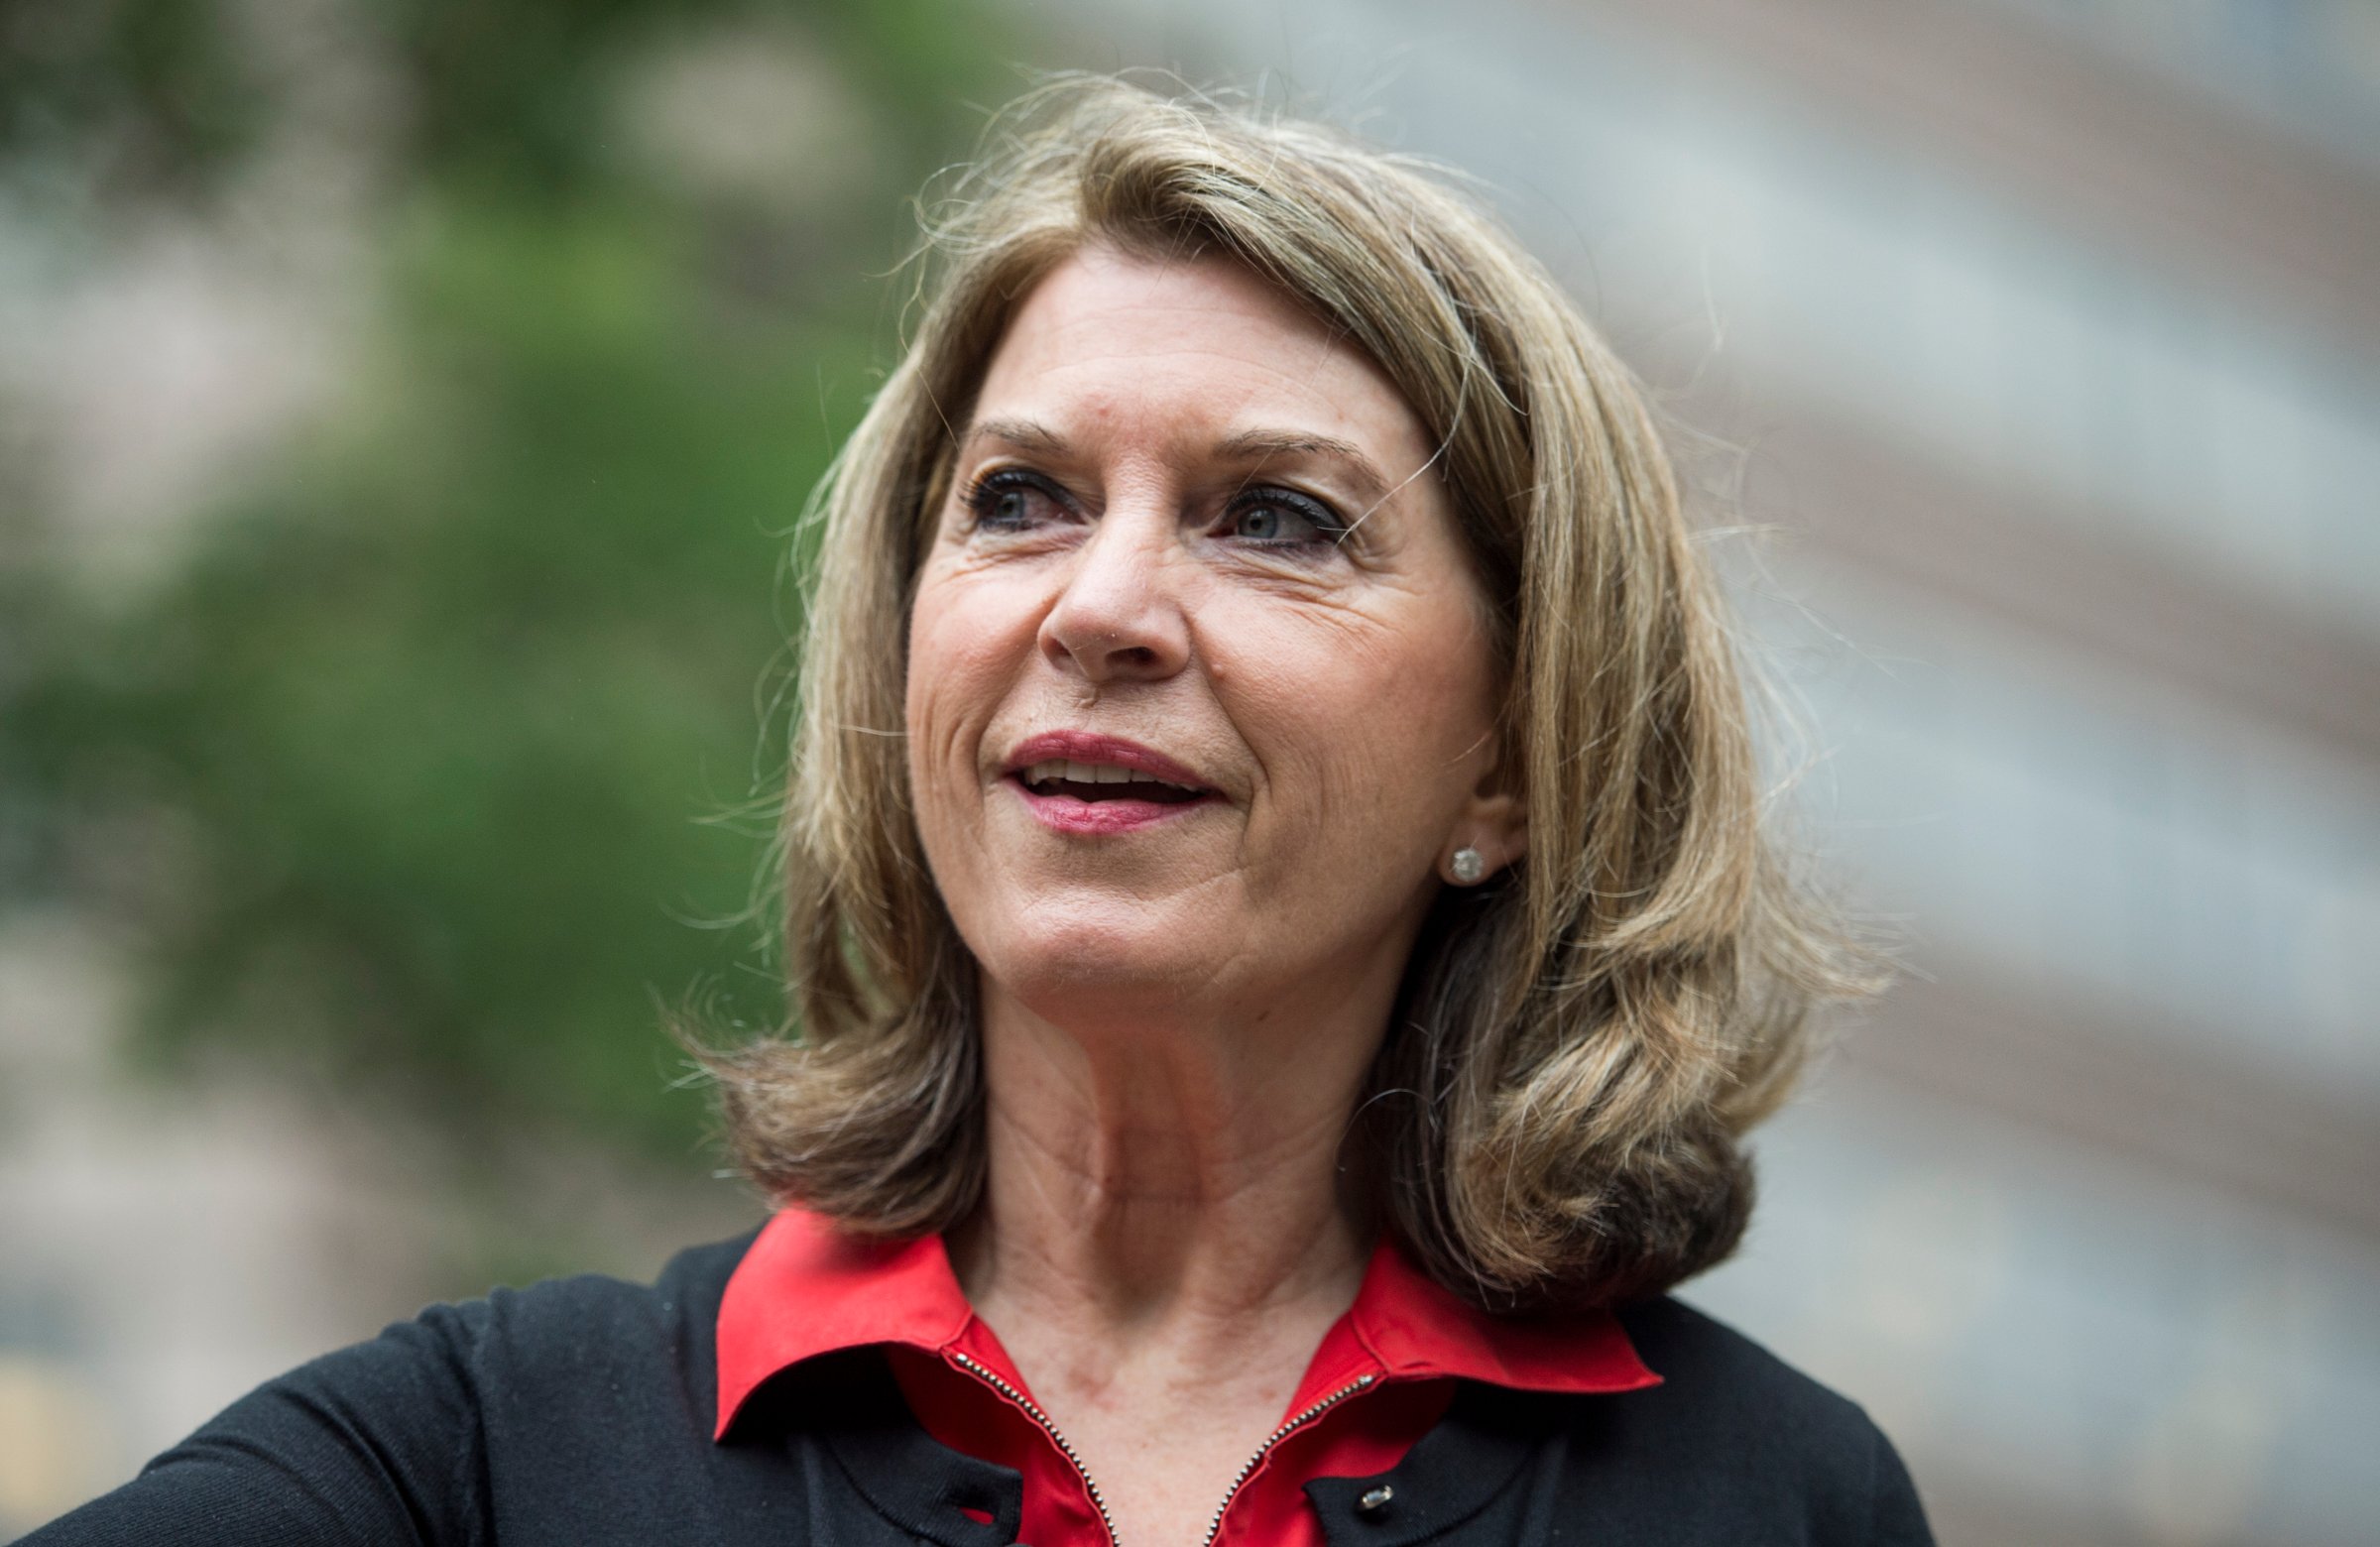 Kathleen Matthews announces her run as a candidate to seek the Democratic nomination to represent Maryland’s 8th Congressional District at the Silver Spring Metro station in Silver Spring, Md on June 3, 2015.